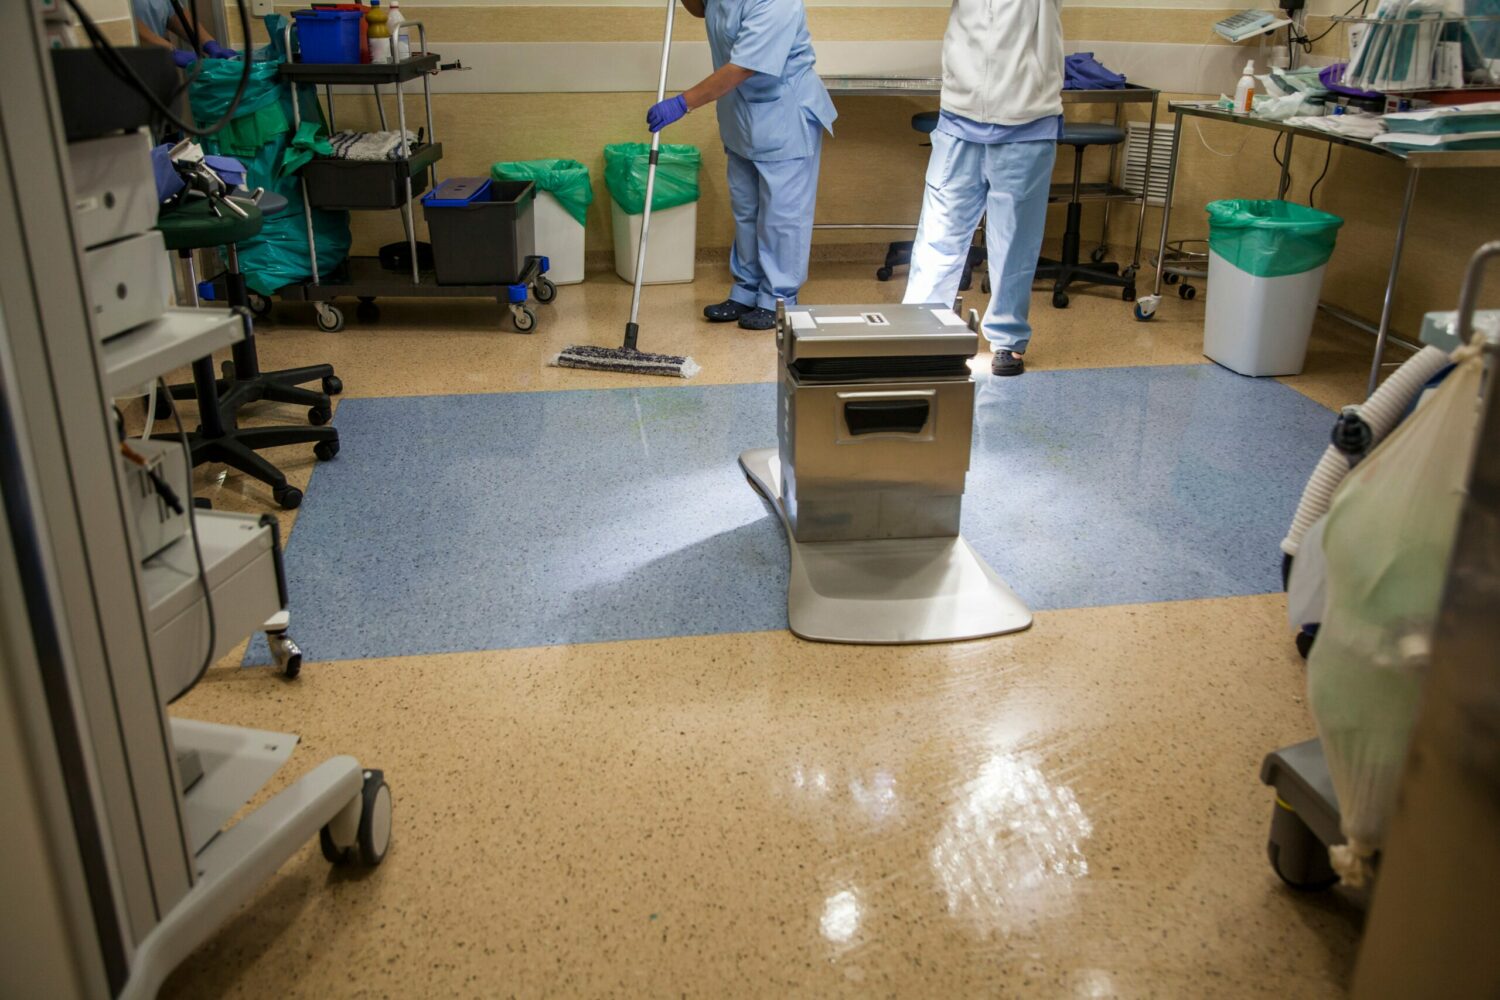 Medical staff cleaning a hospital room